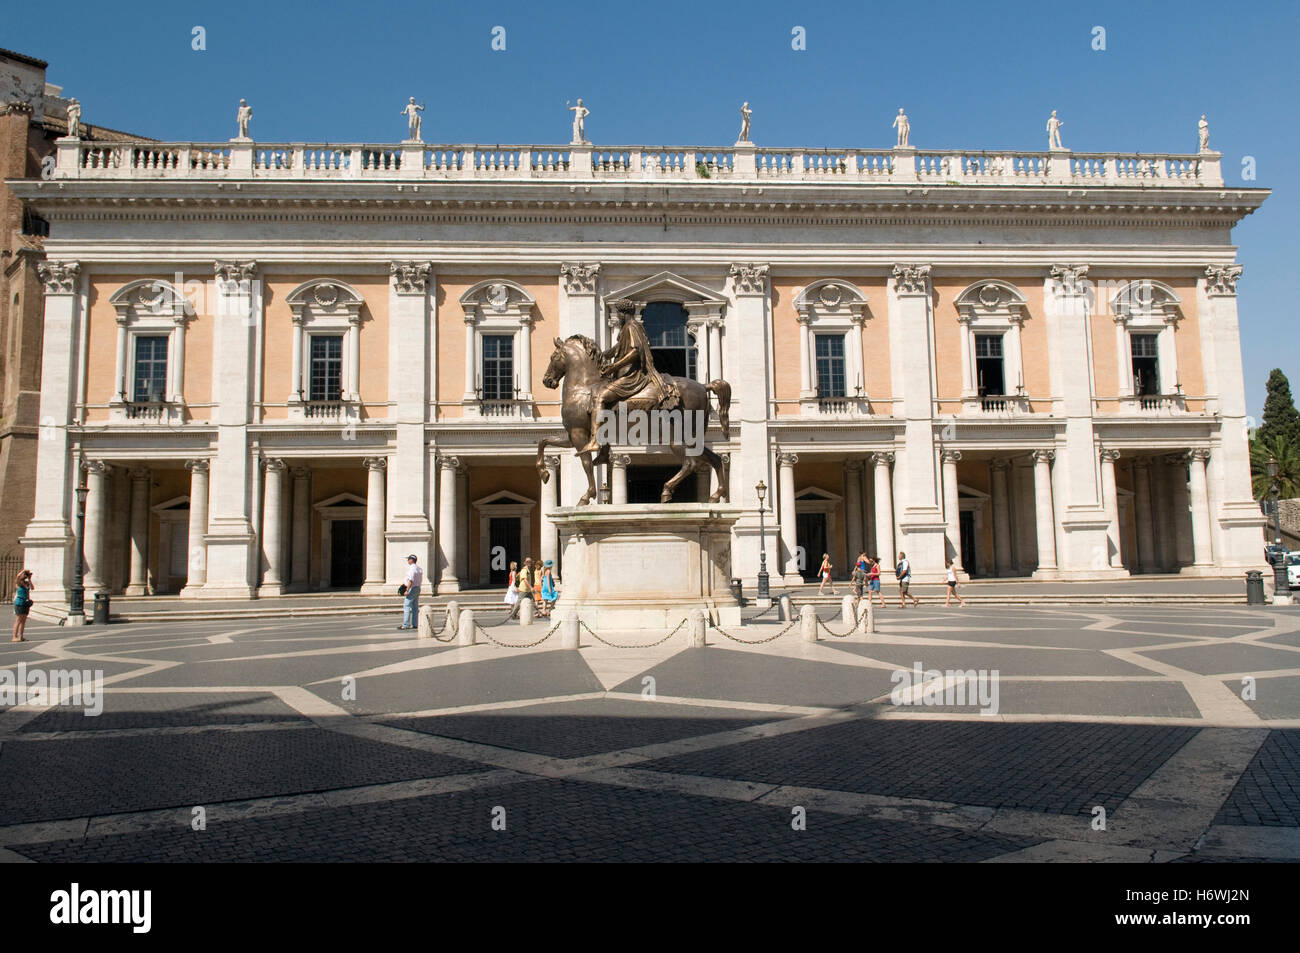 Equestrian statue of Marcus Aurelius on the Capitoline Hill, the Palazzo Nuovo, Capitoline Museums, Rome, Italy, Europe Stock Photo